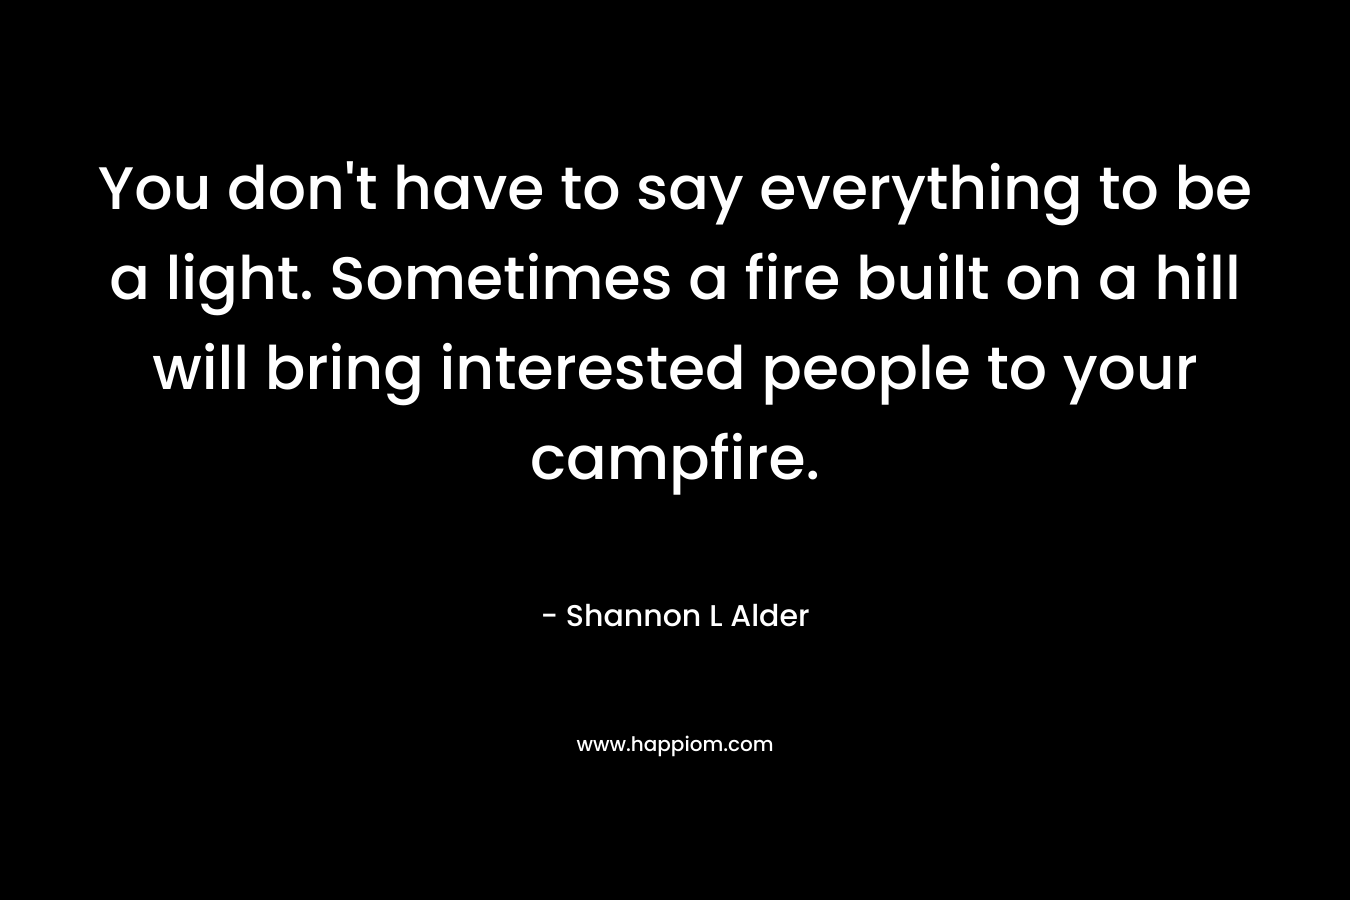 You don't have to say everything to be a light. Sometimes a fire built on a hill will bring interested people to your campfire.